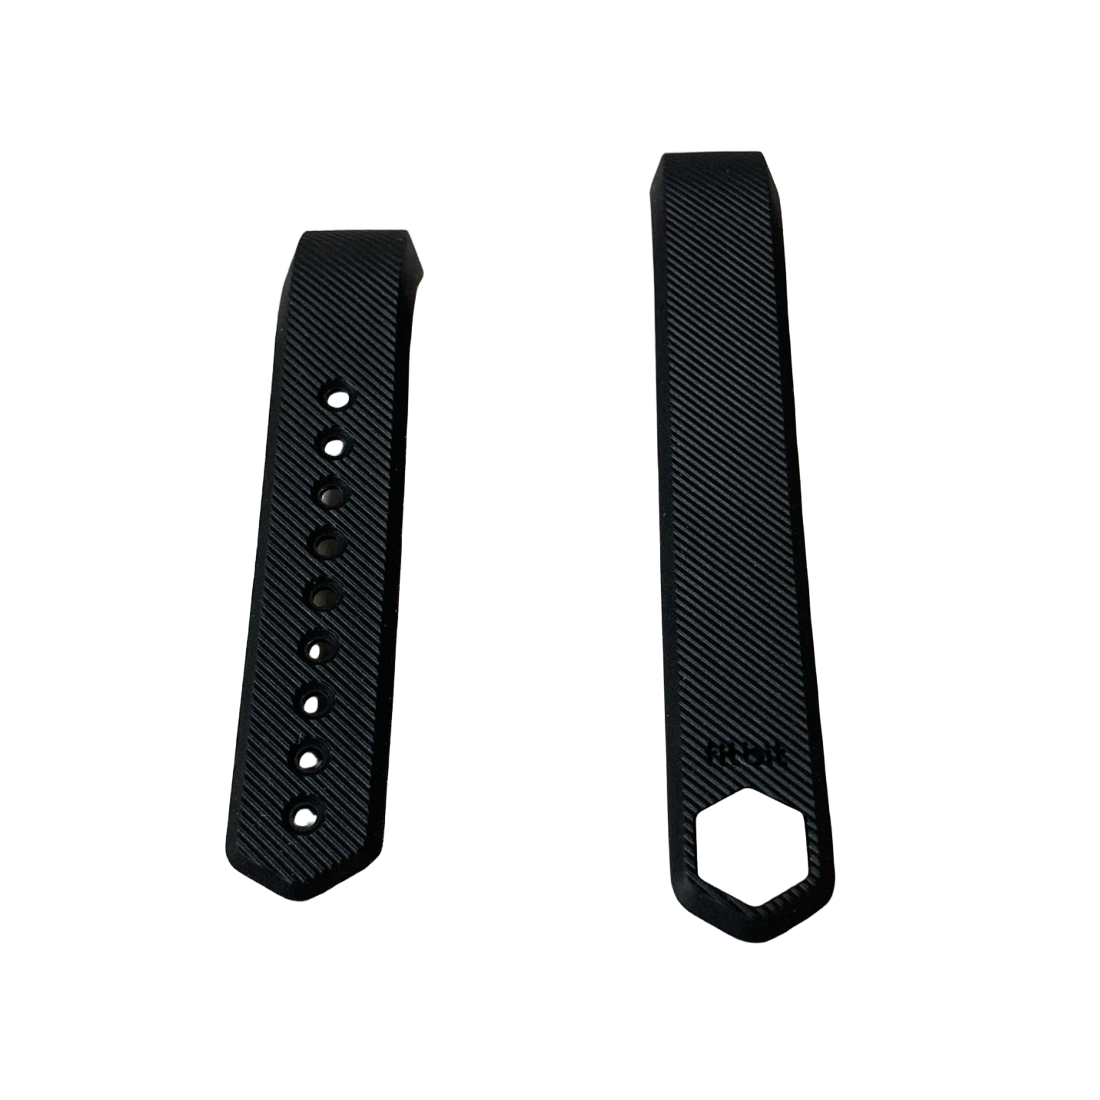 Fitbit FBR160ABBKL Charge 2 Accessory Band - Black - Large